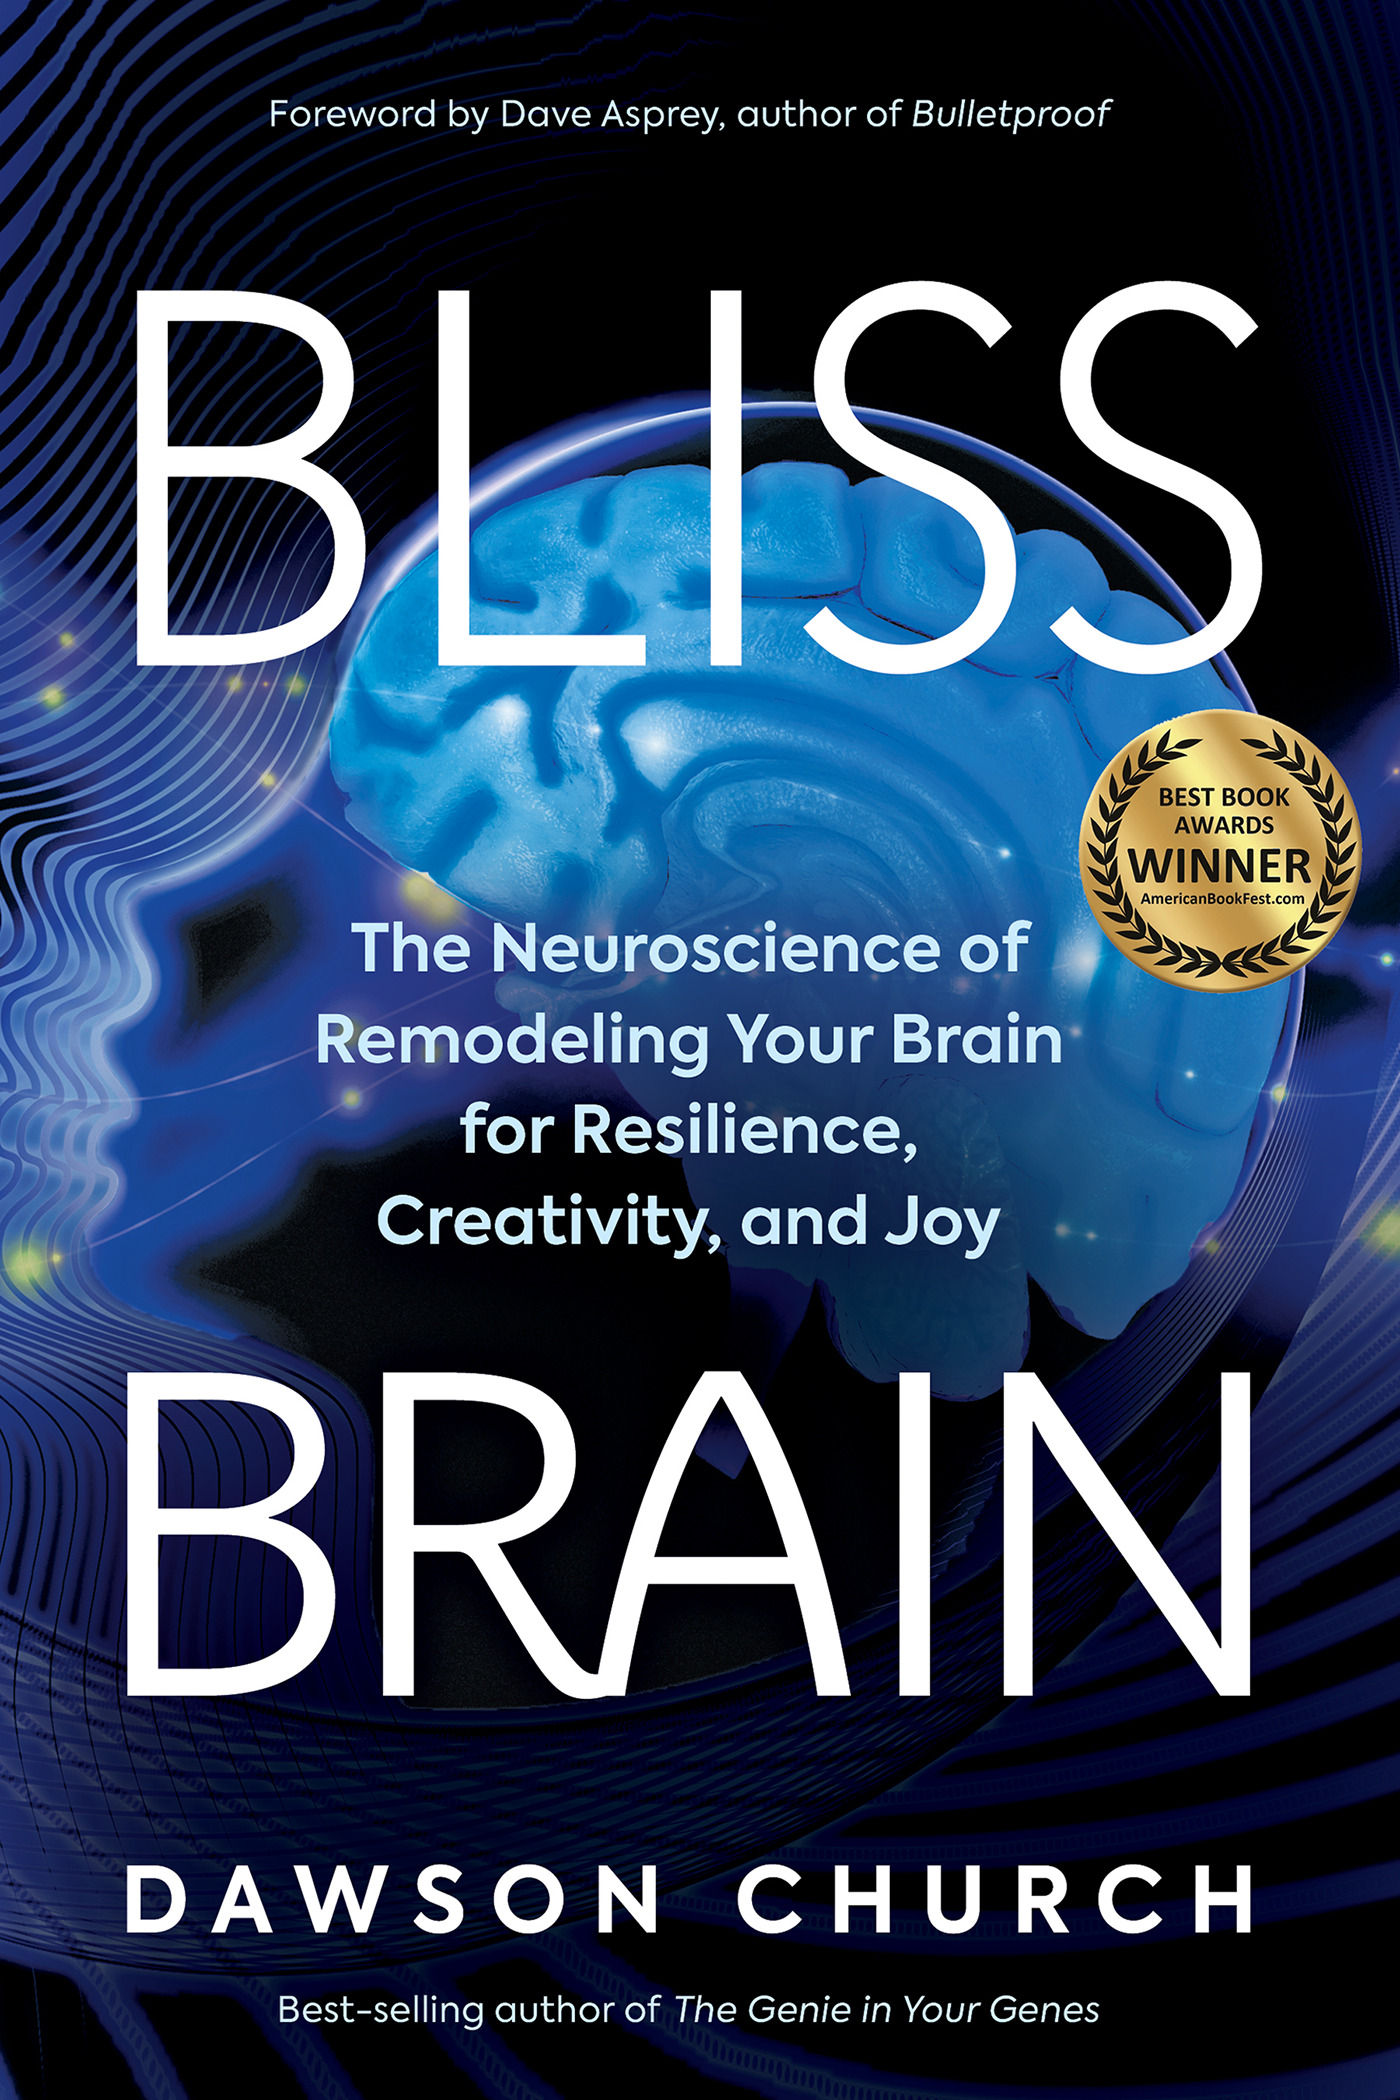 Bliss Brain : The Neuroscience of Remodeling Your Brain for Resilience, Creativity, and Joy | Church, Dawson